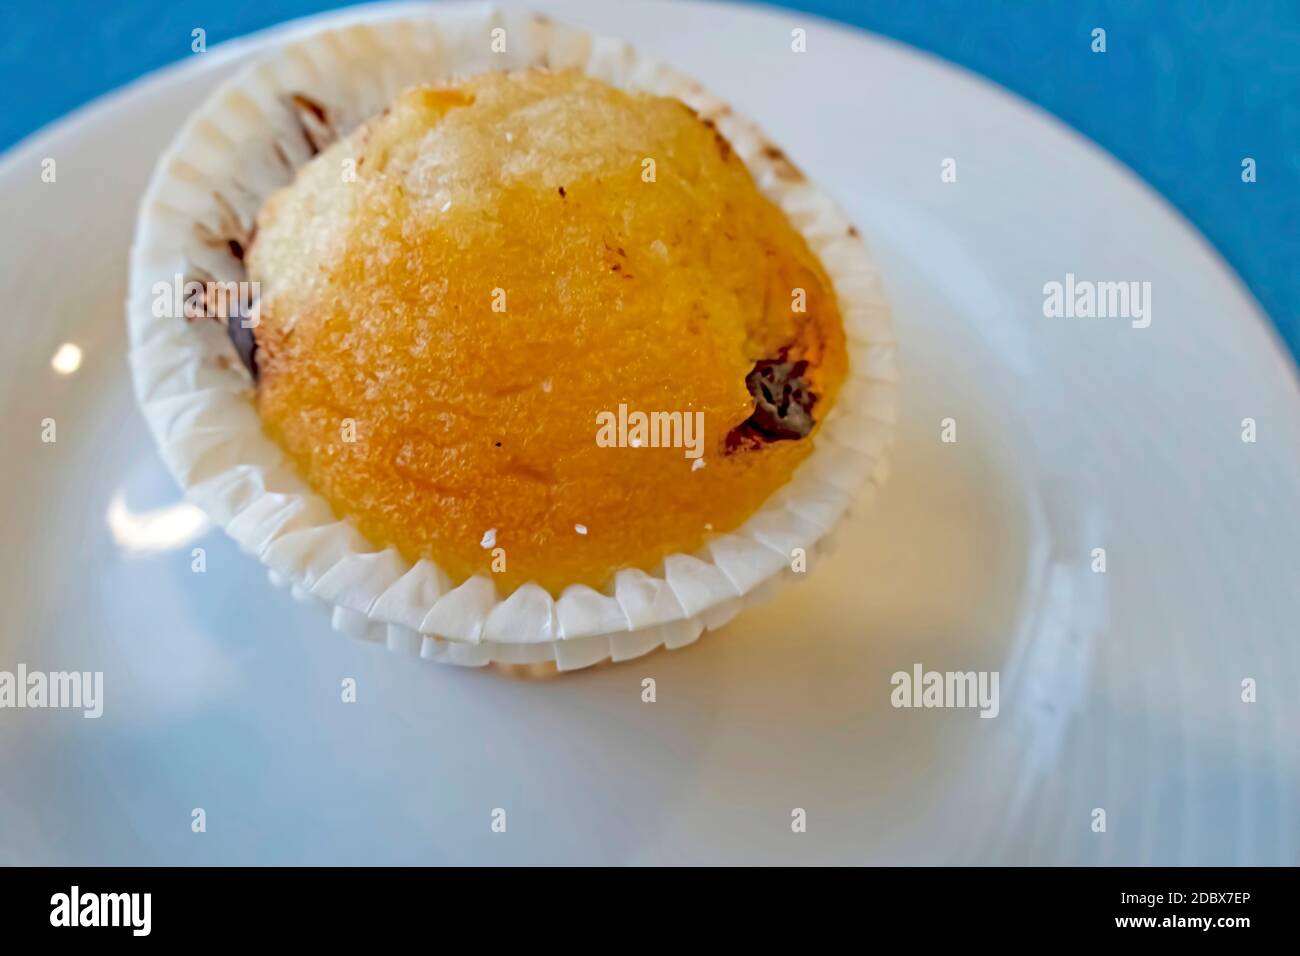 close up ready to eat muffin on aplate Stock Photo